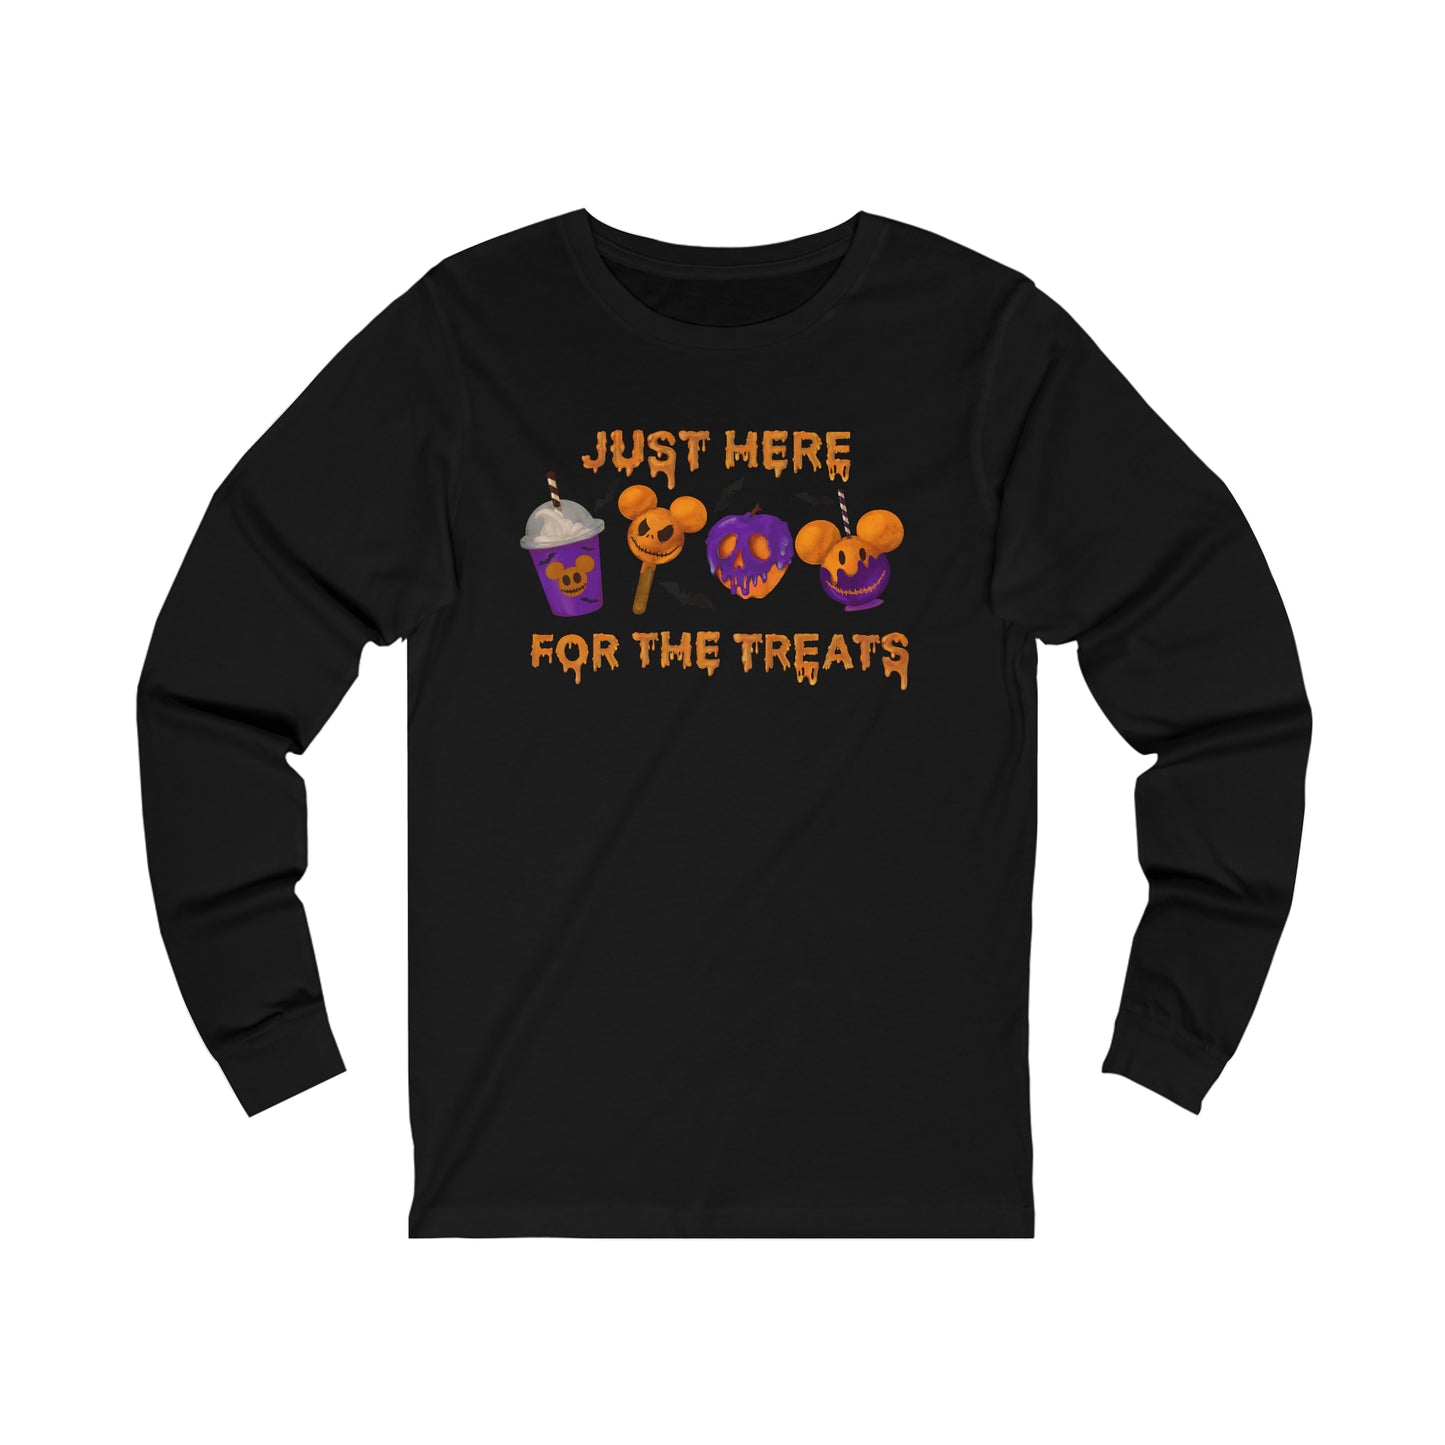 Just Here For The Treats Unisex Long Sleeve Graphic Tee